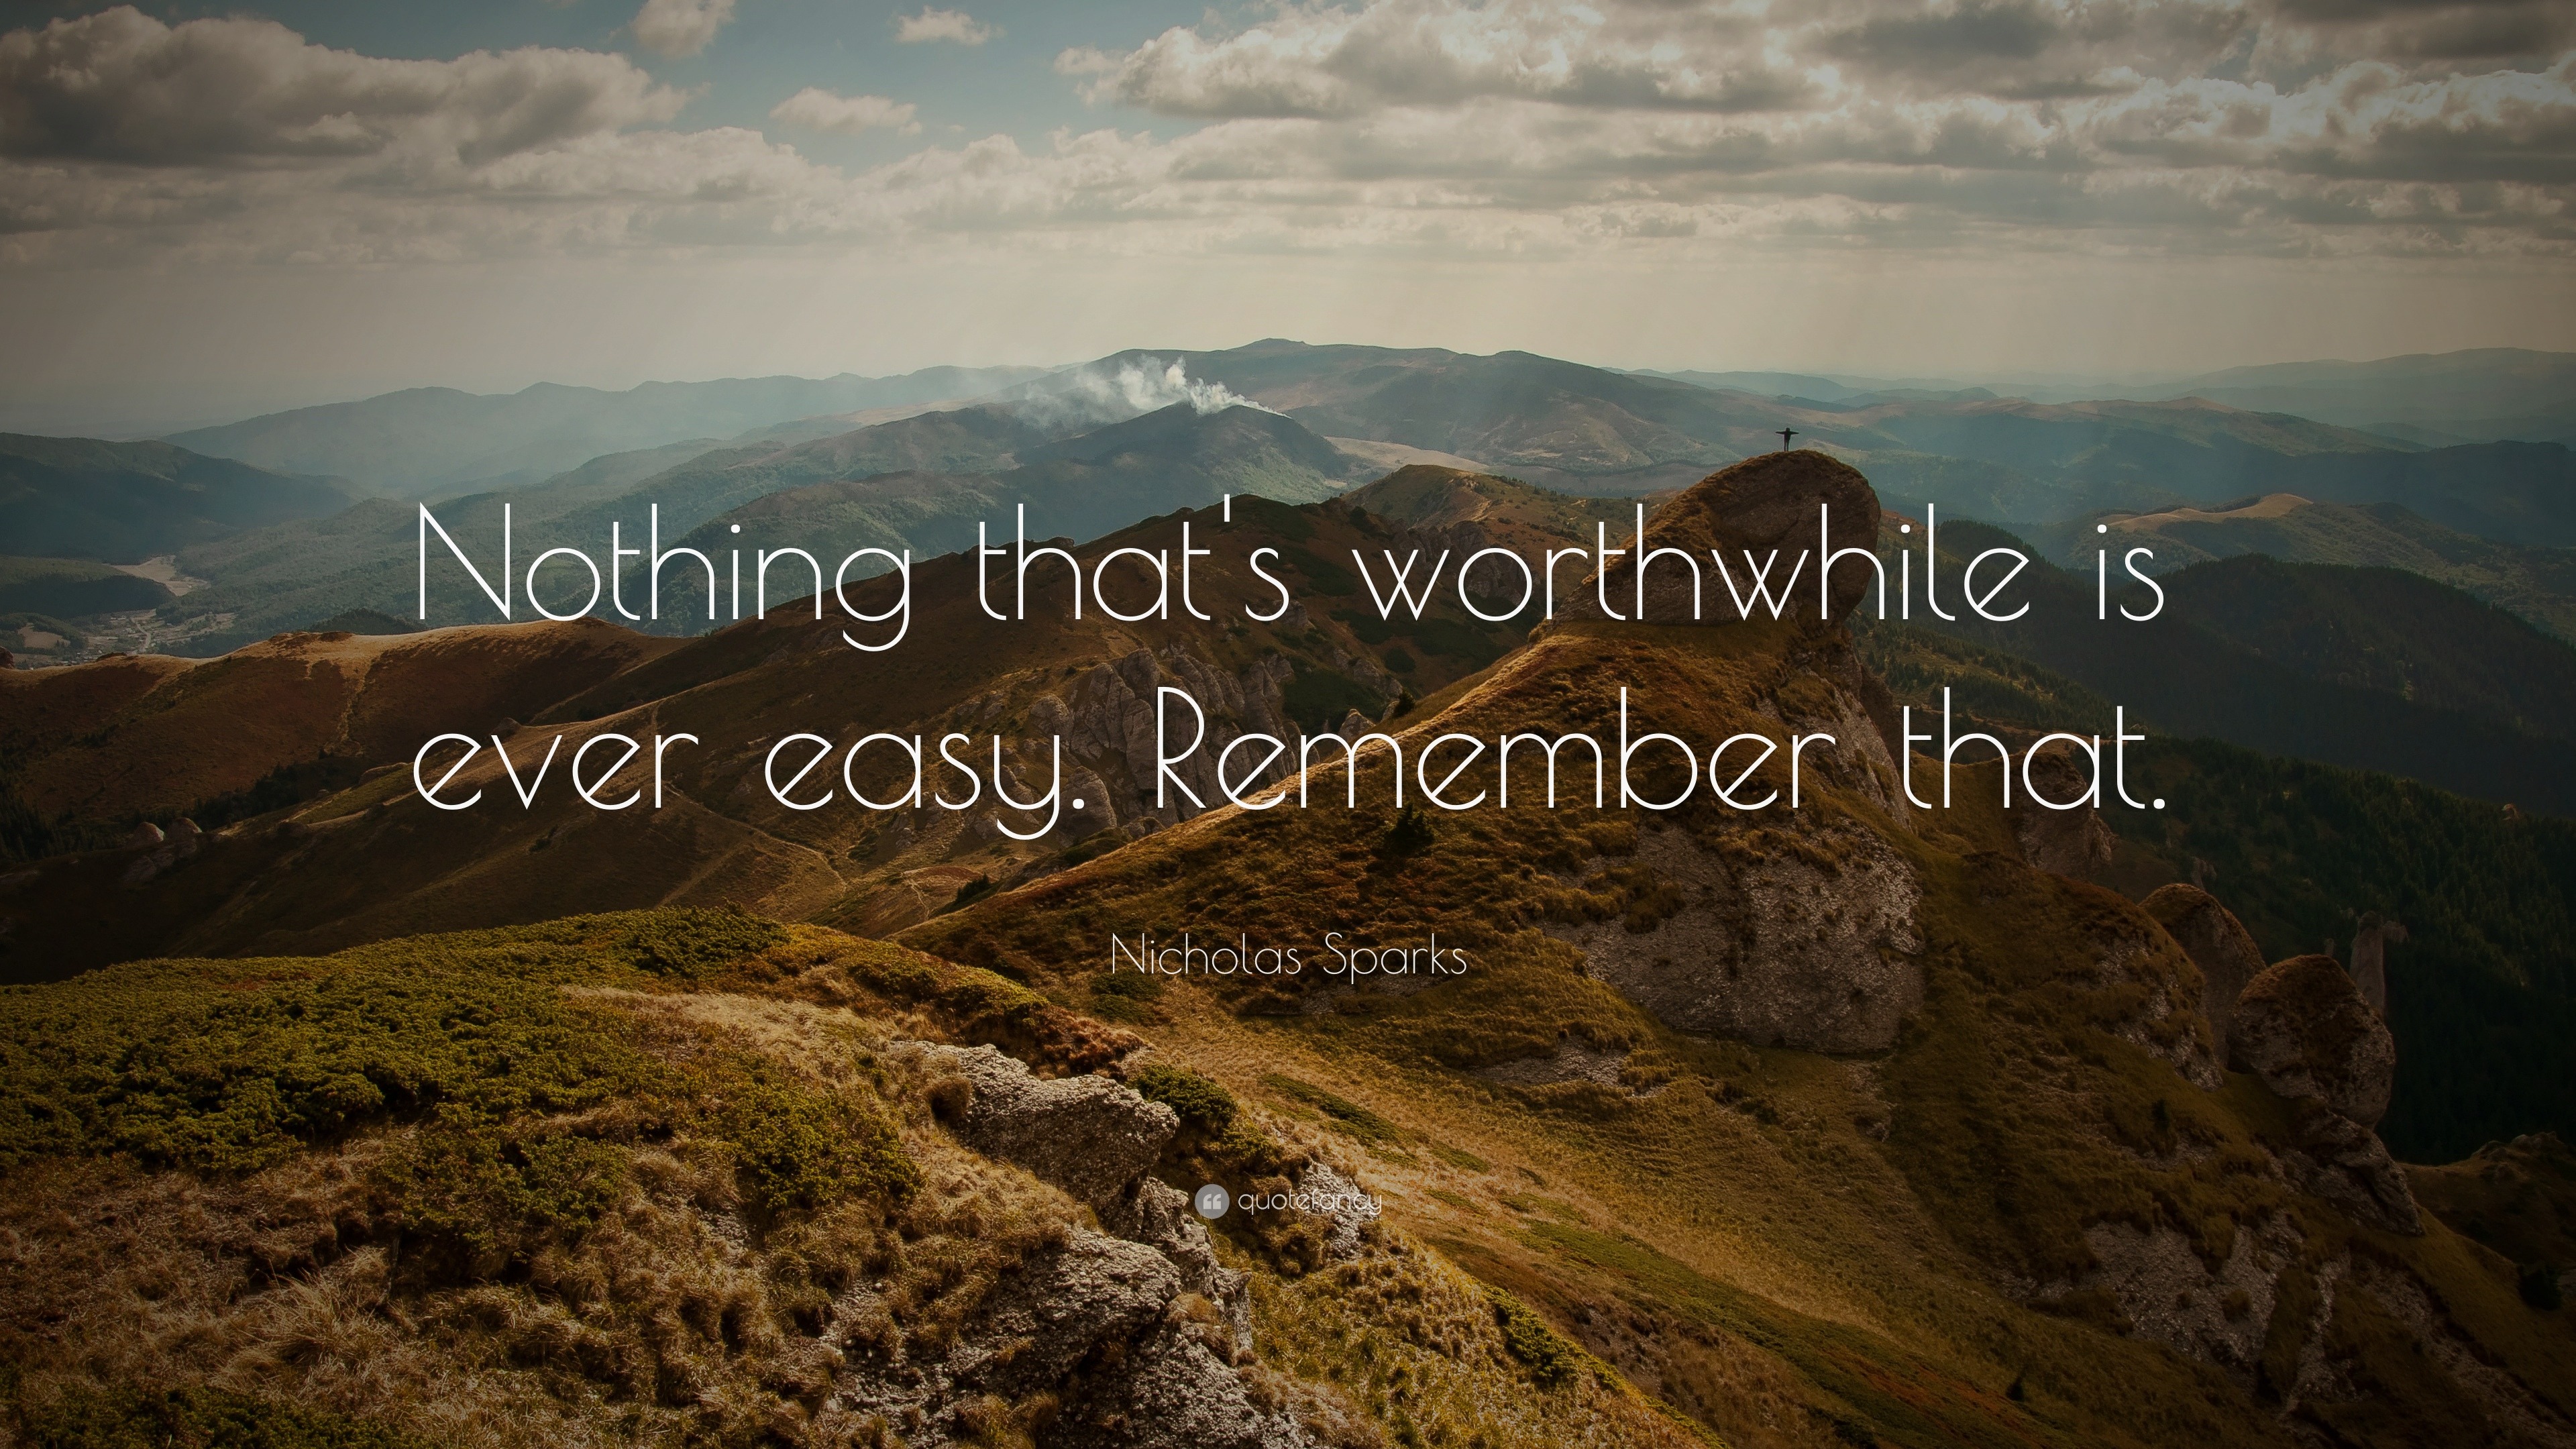 6723-Nicholas-Sparks-Quote-Nothing-that-s-worthwhile-is-ever-easy.jpg